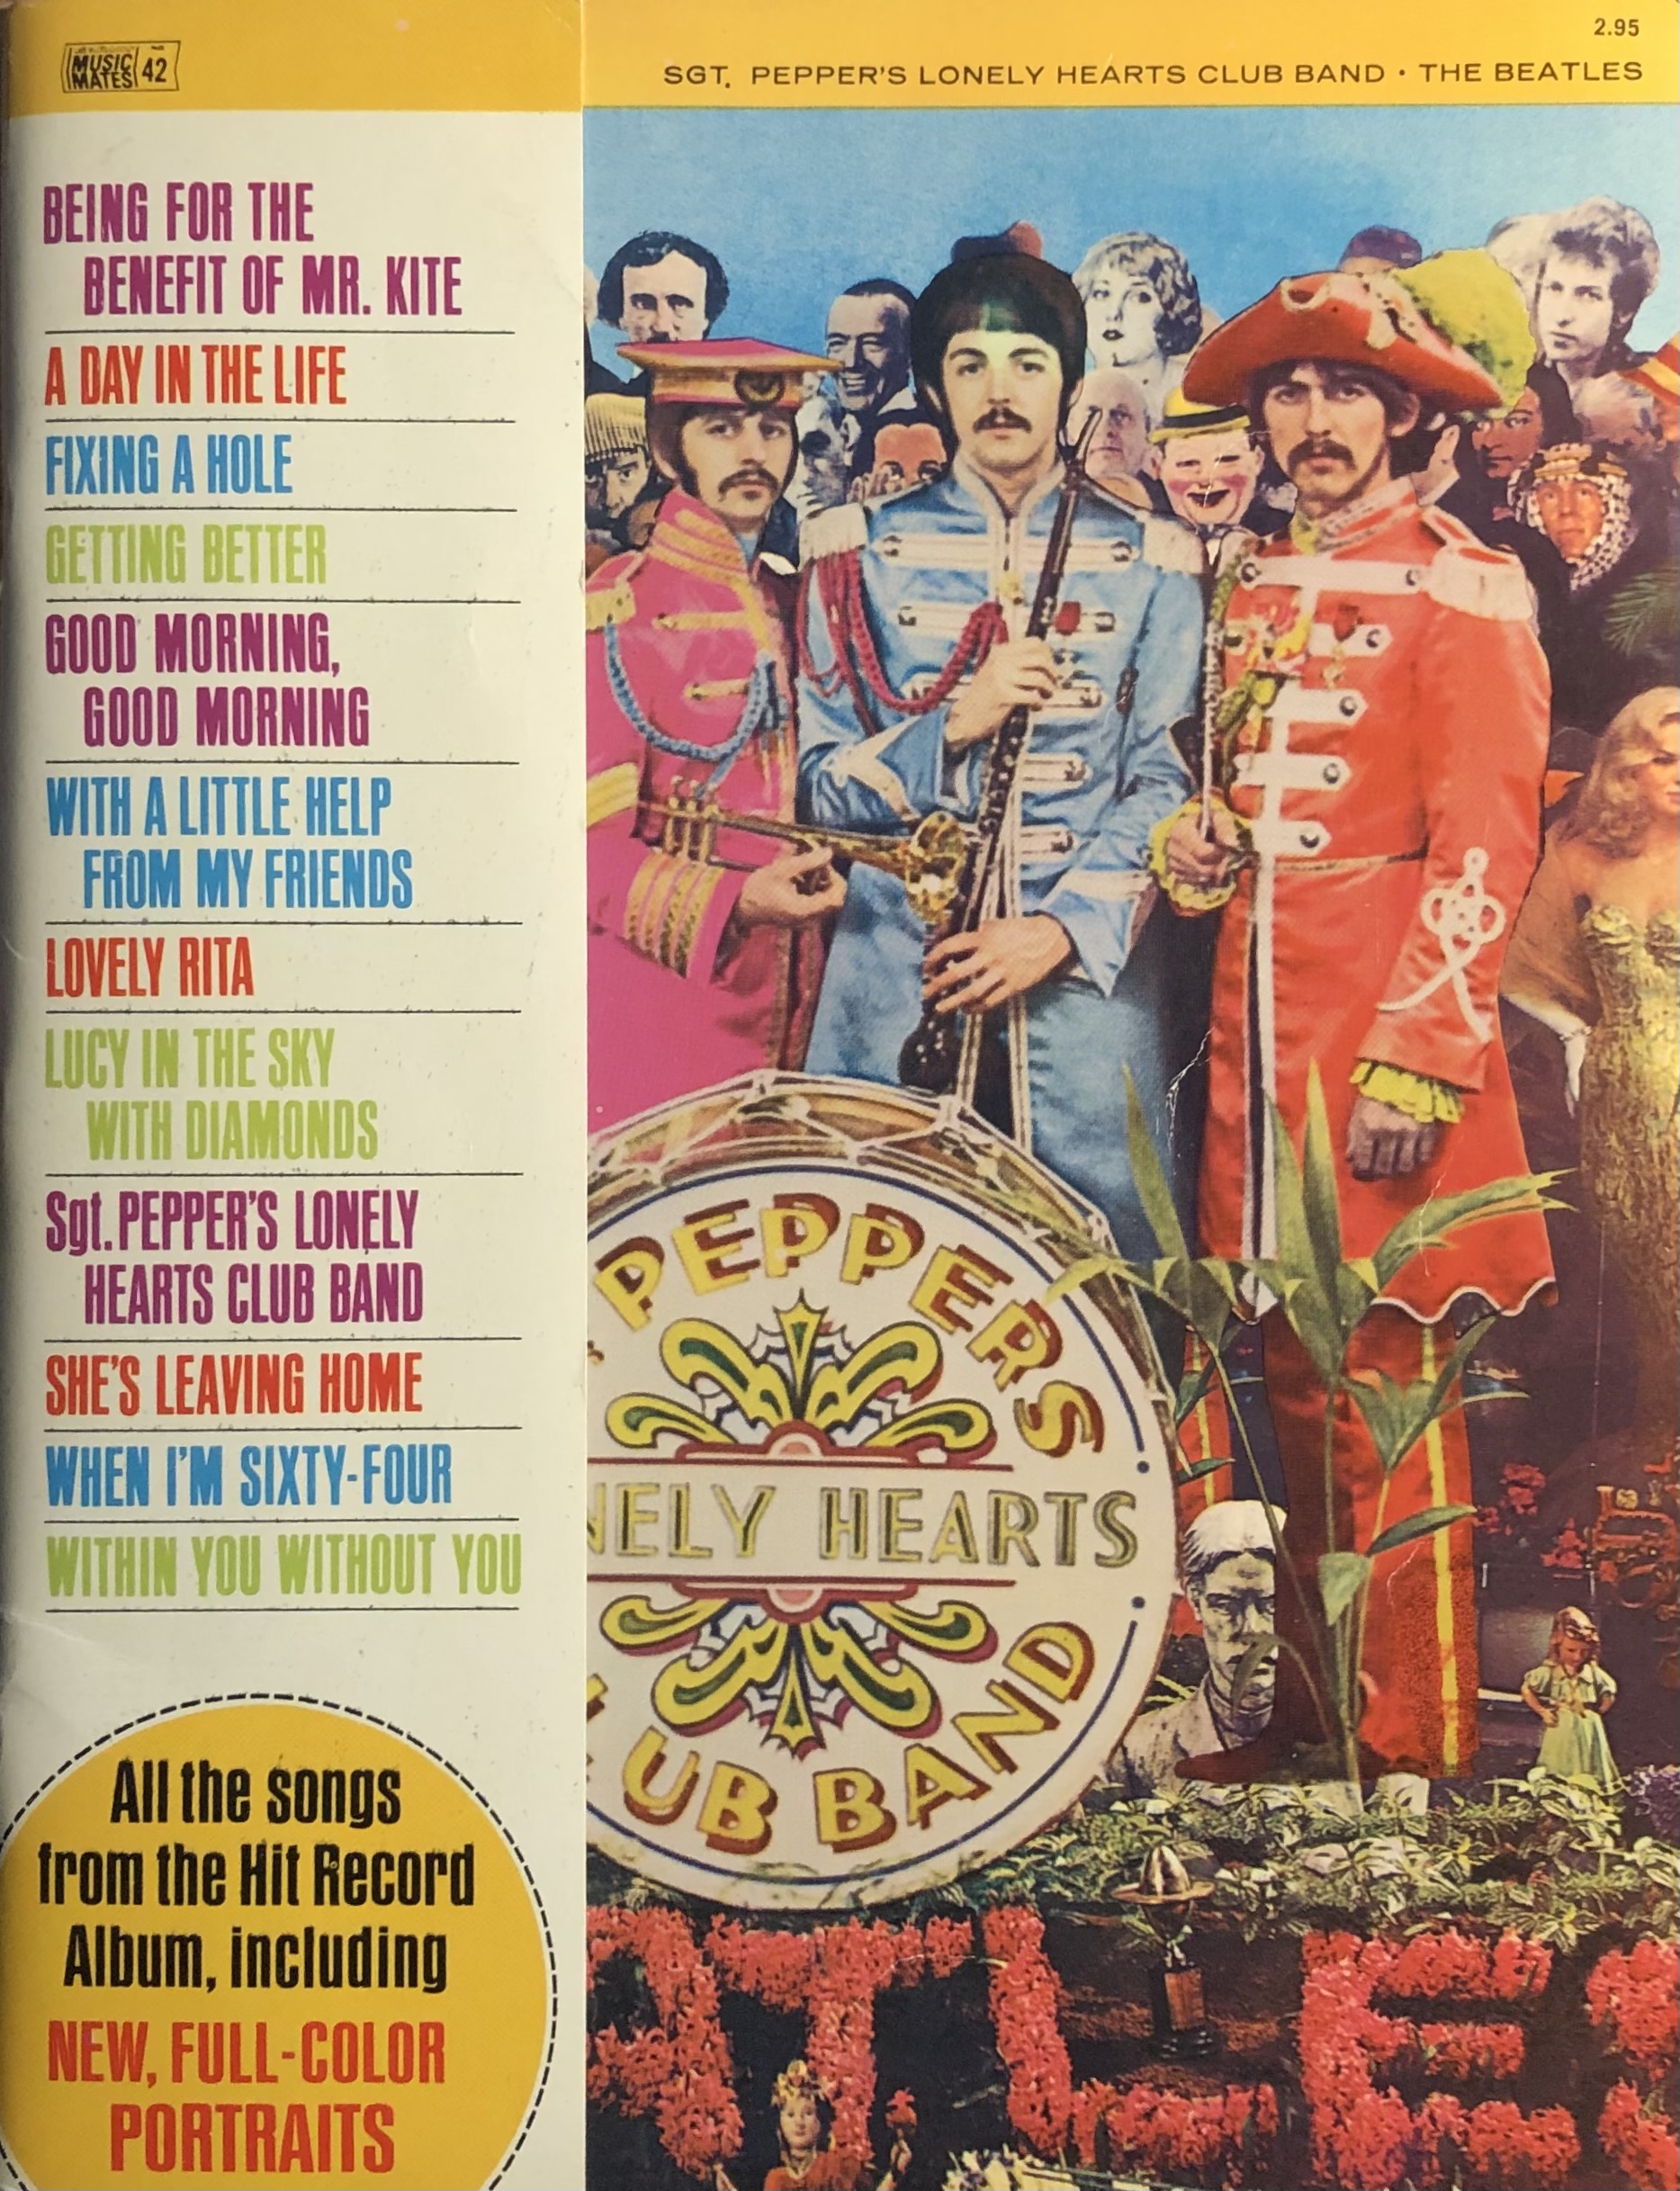 Sgt. Pepper's Lonely Hearts Club Band Songbook by Beatles: Near Fine Soft  cover (1967) 1st Edition | American Books & Papers